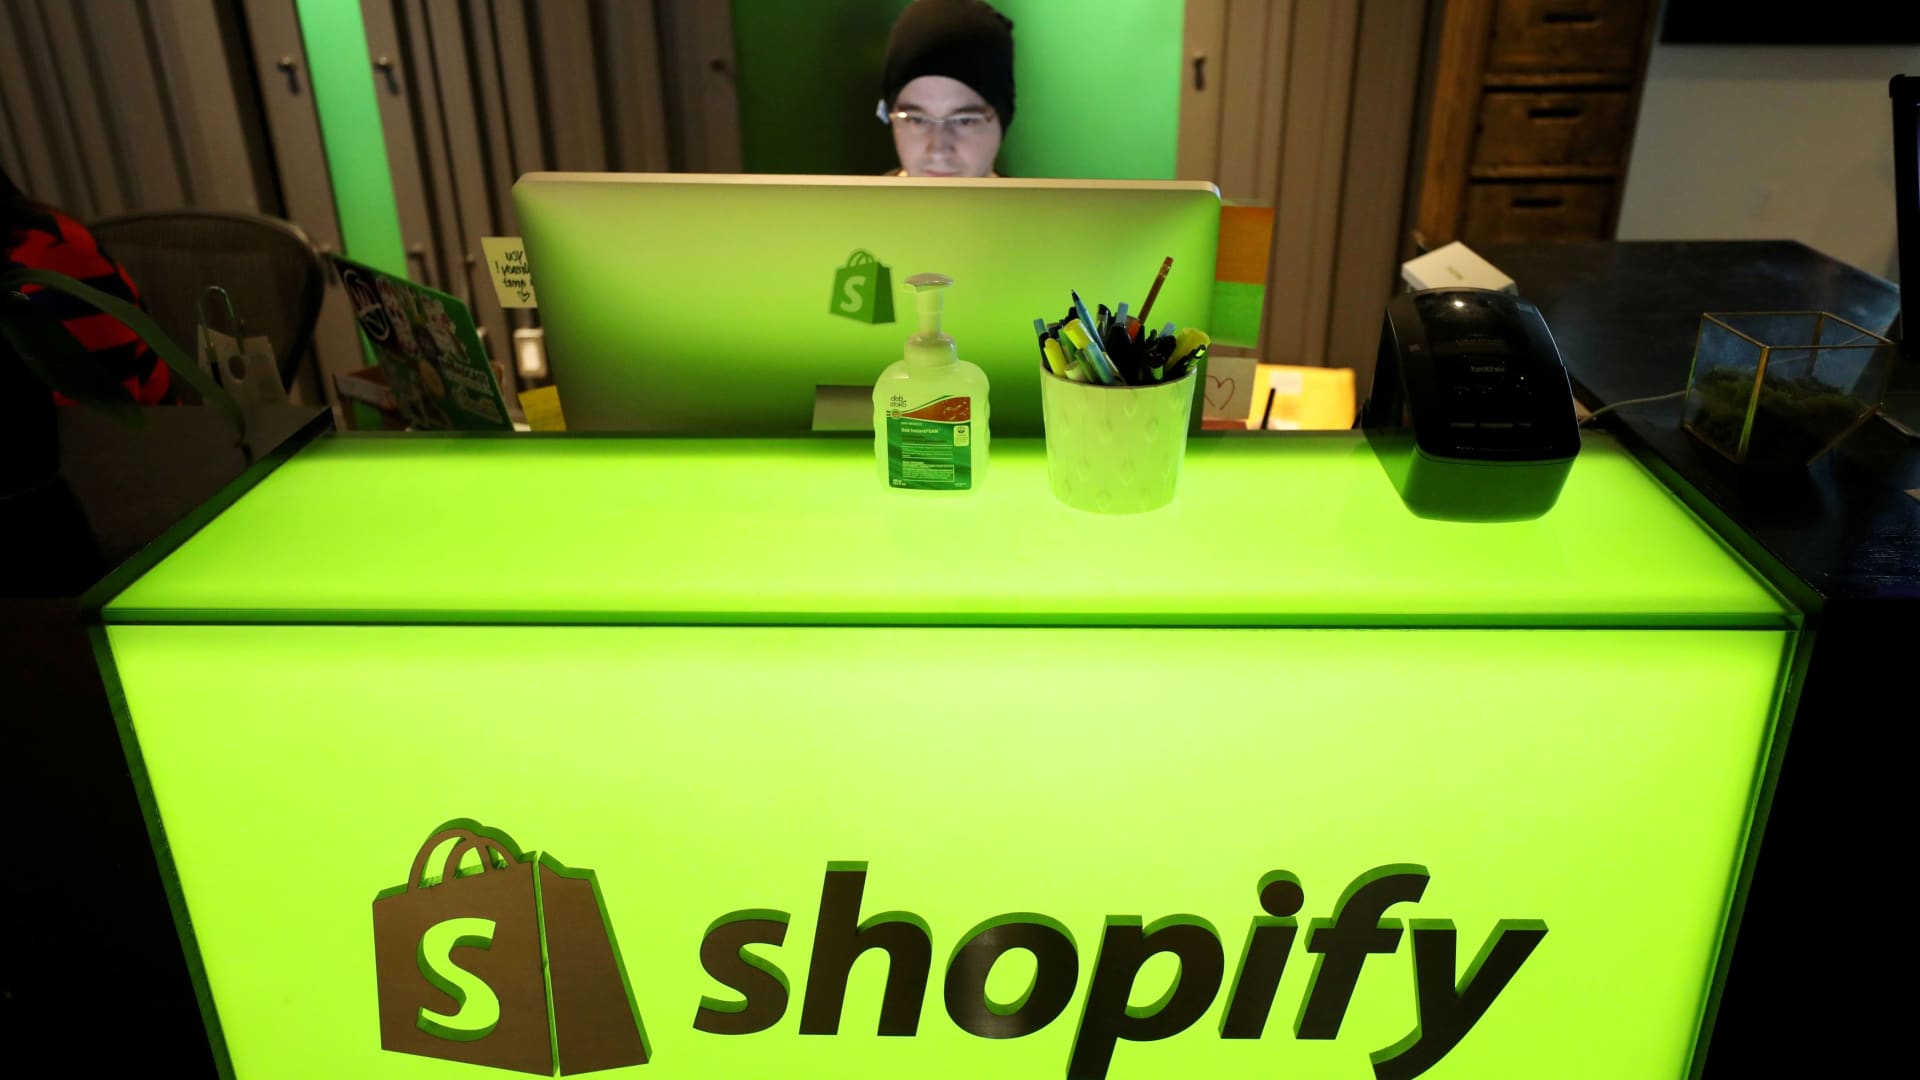 Shopify stock sinks 14% after company says it will lay off 10% of workers